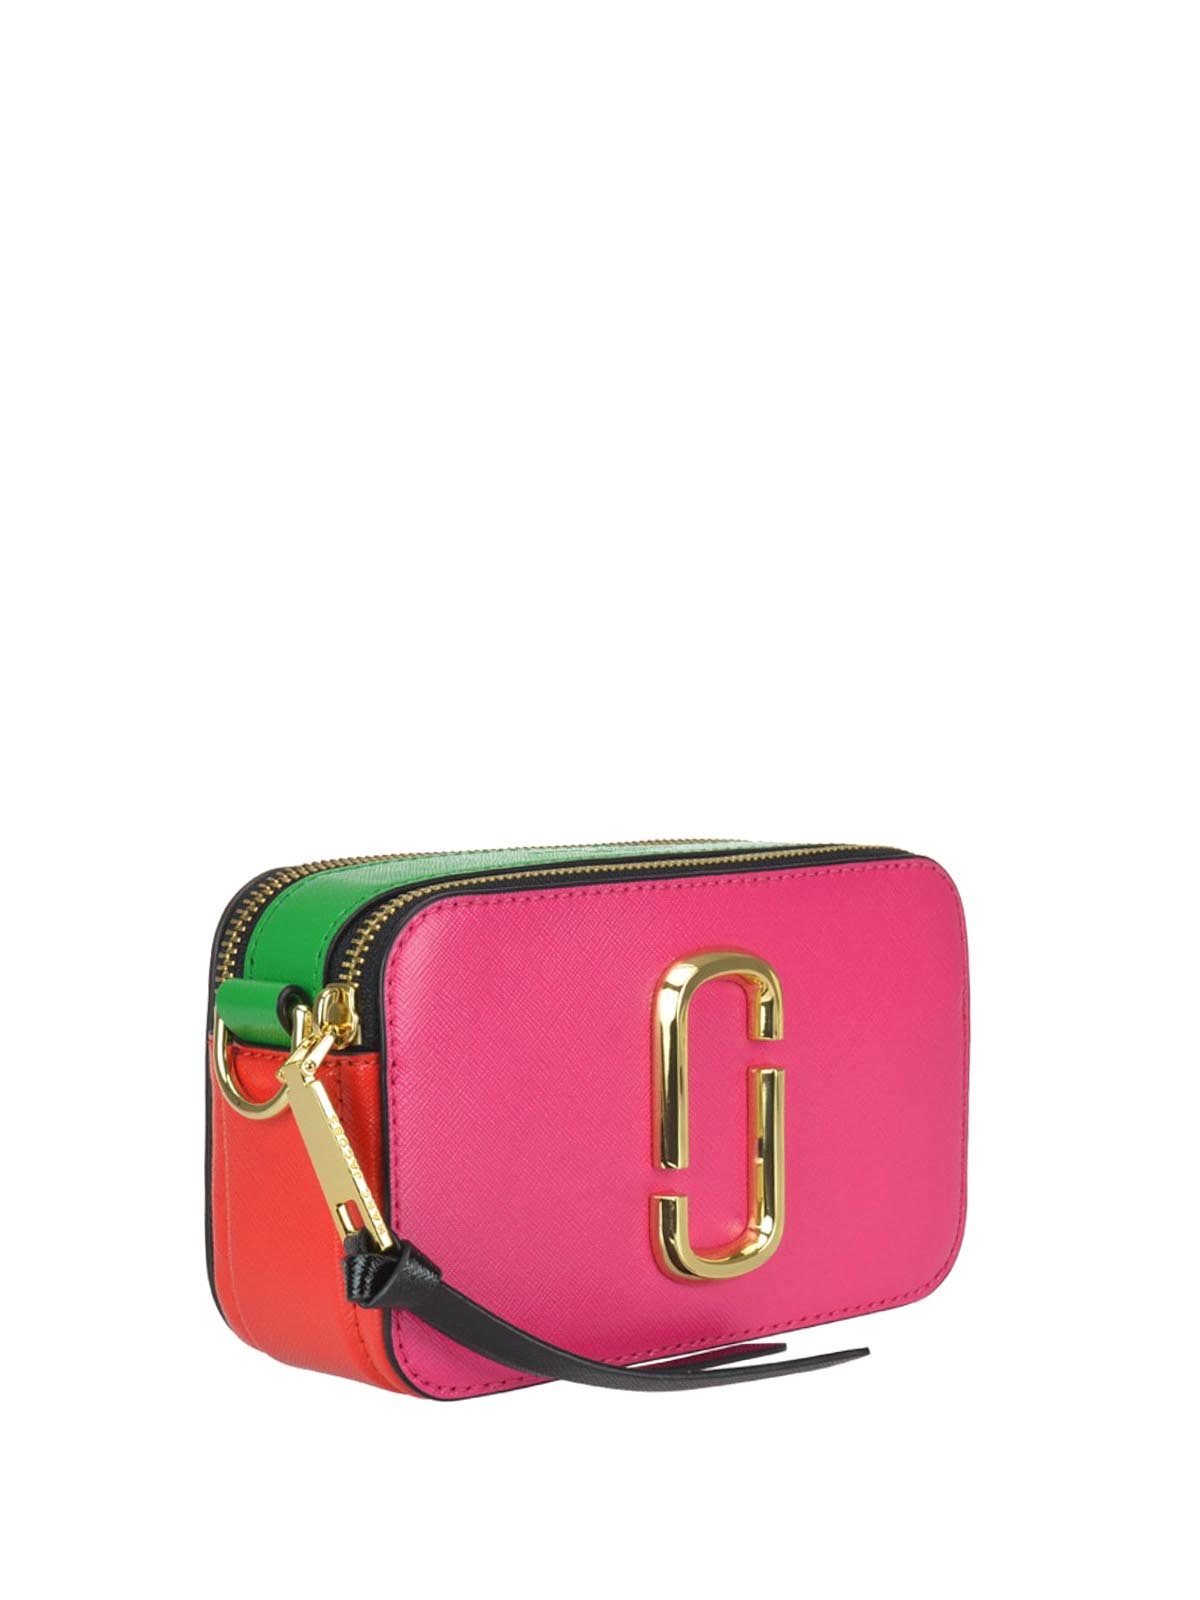 MARC JACOBS Snapshot Leather Crossbody Bag Multicolor